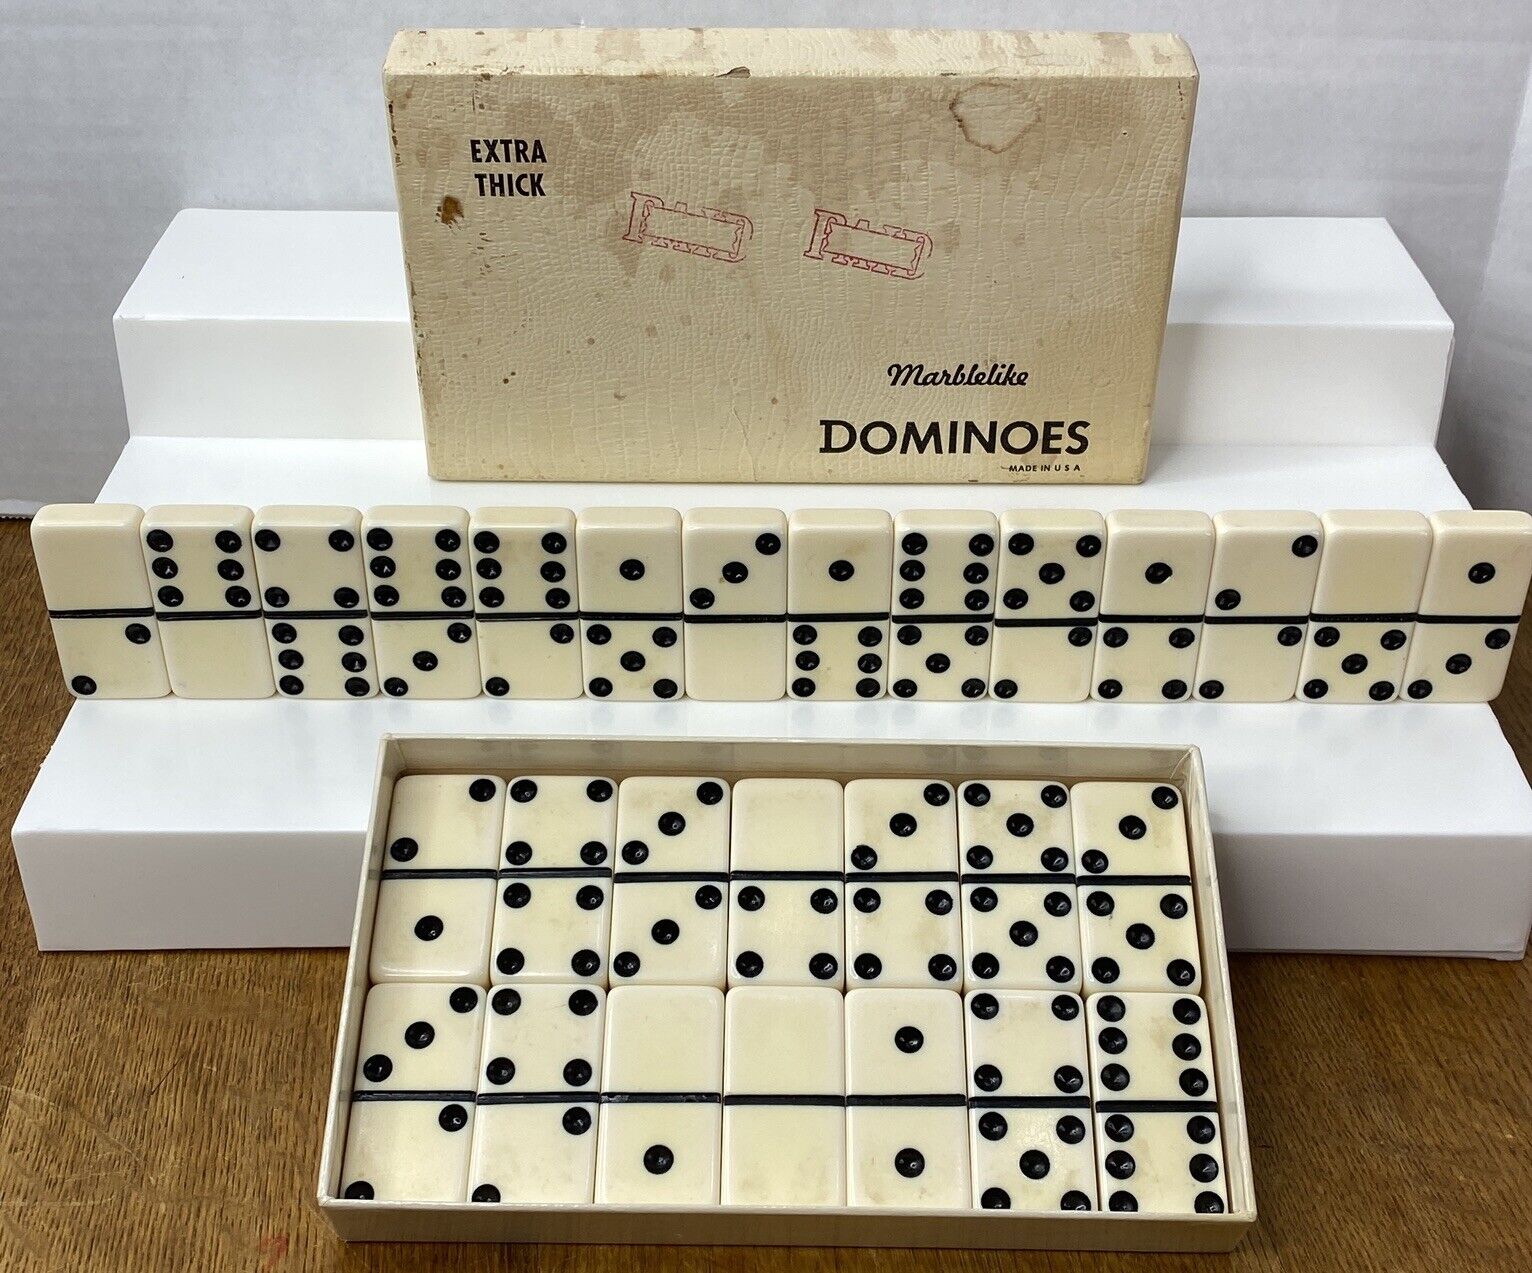 Vintage Puremco Extra Thick Marblelike Dominoes No.716 White Made in Waco Texas